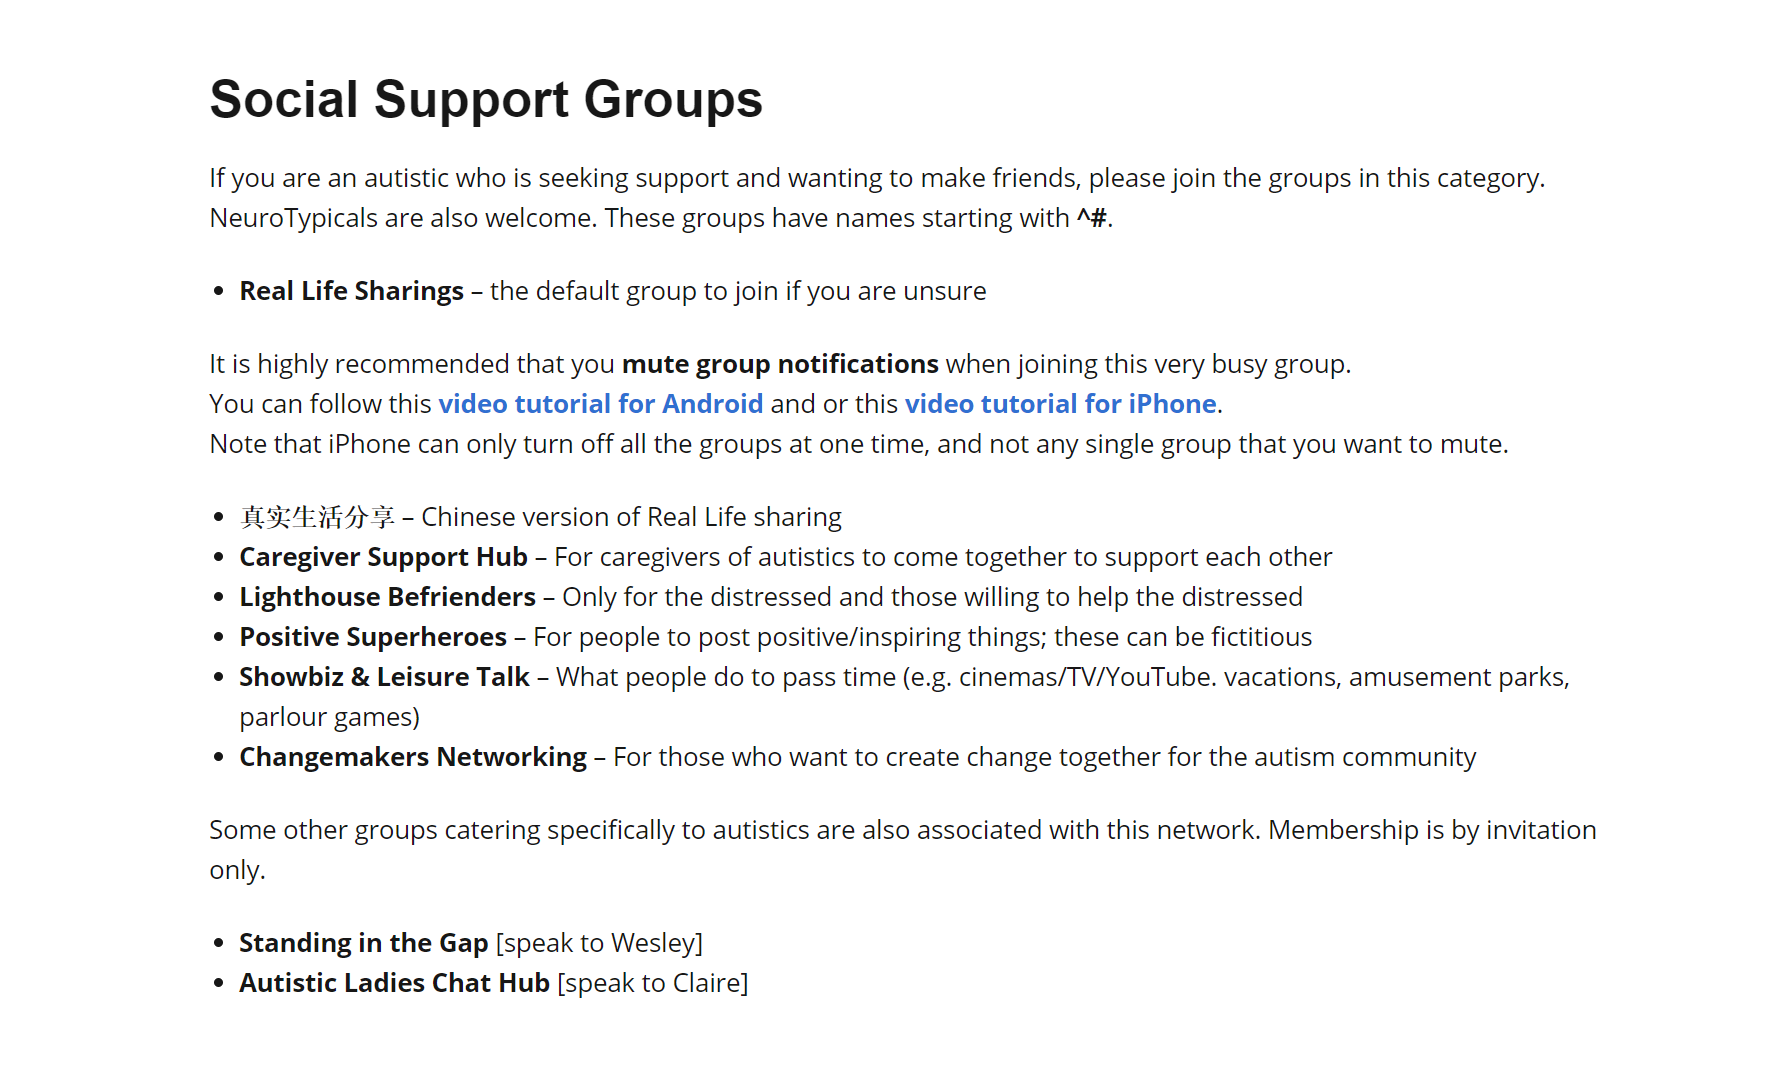 A screenshot of various social support groups in the WhatsApp Autism Community Singapore chat group, which includes Caregiver Support Hub, Changemakers Networking, and Lighthouse Befrienders